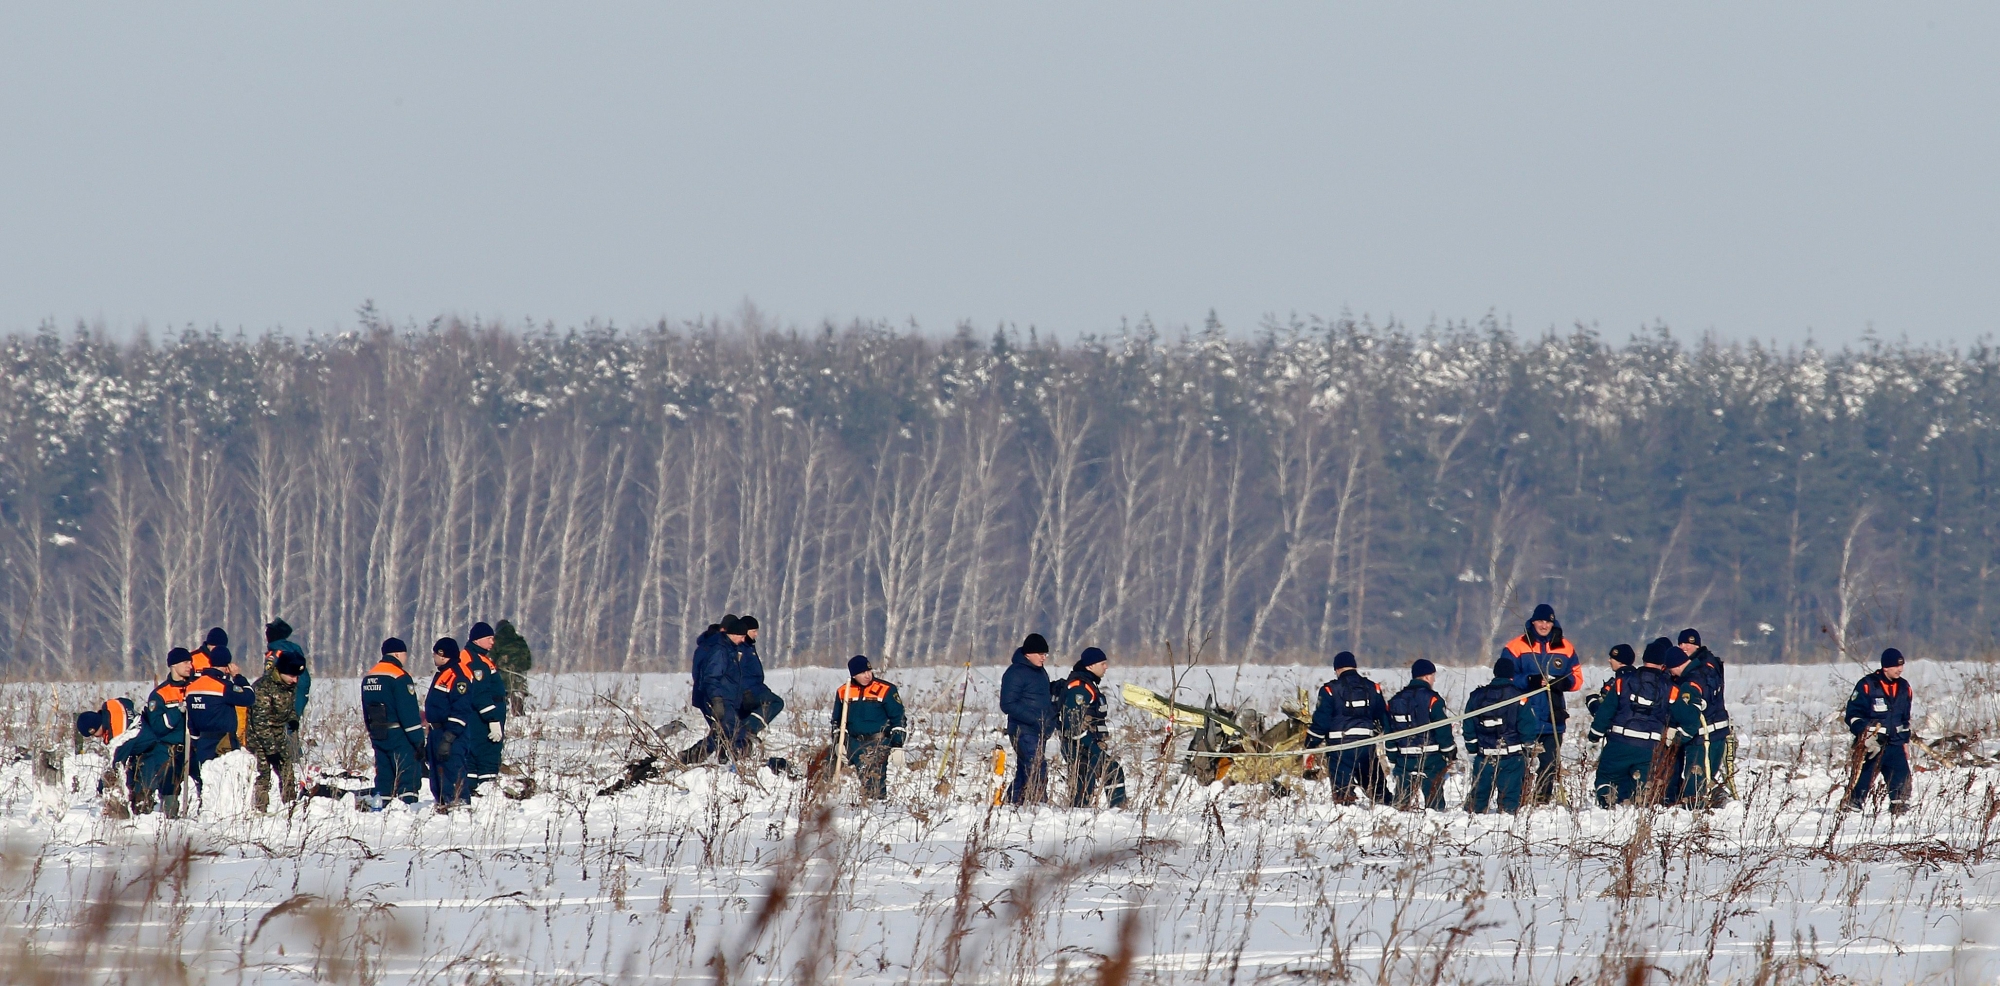 Personnel work at the scene of a AN-148 plane crash in Stepanovskoye village, about 40 kilometers (25 miles) from the Domodedovo airport, Russia, Moday, Feb. 12, 2018. A Russian passenger plane carrying 71 people crashed Sunday near Moscow, killing everyone aboard shortly after the jet took off from one of the city's airports. The Saratov Airlines regional jet disappeared from radar screens a few minutes after departing from Domodedovo Airport en route to Orsk, a city some 1,500 kilometers (1,000 miles) southeast of Moscow. (AP Photo/Alexander Zemlianichenko) Russia Plane Crash